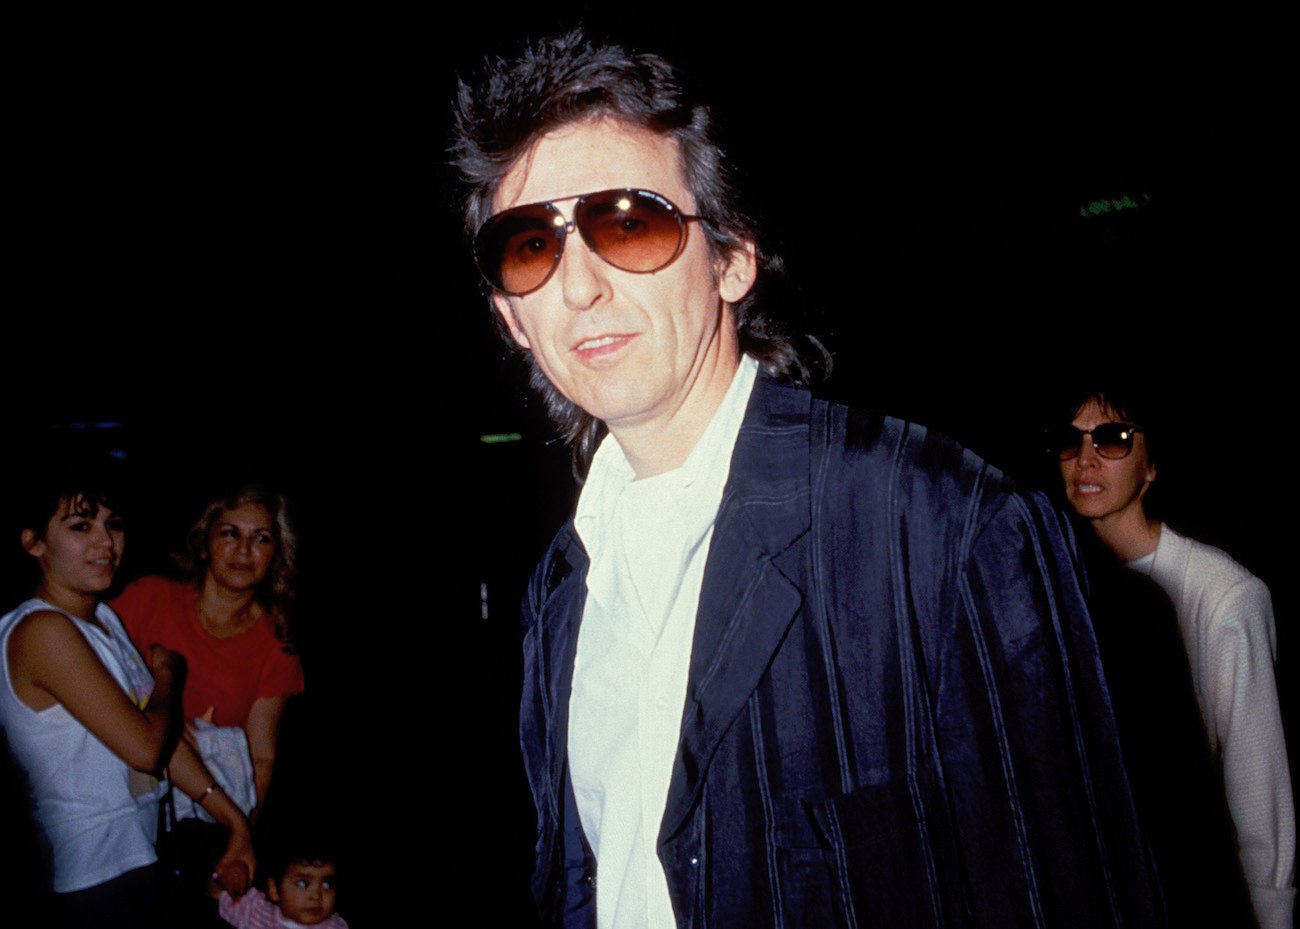 George Harrison at the airport in 1988.